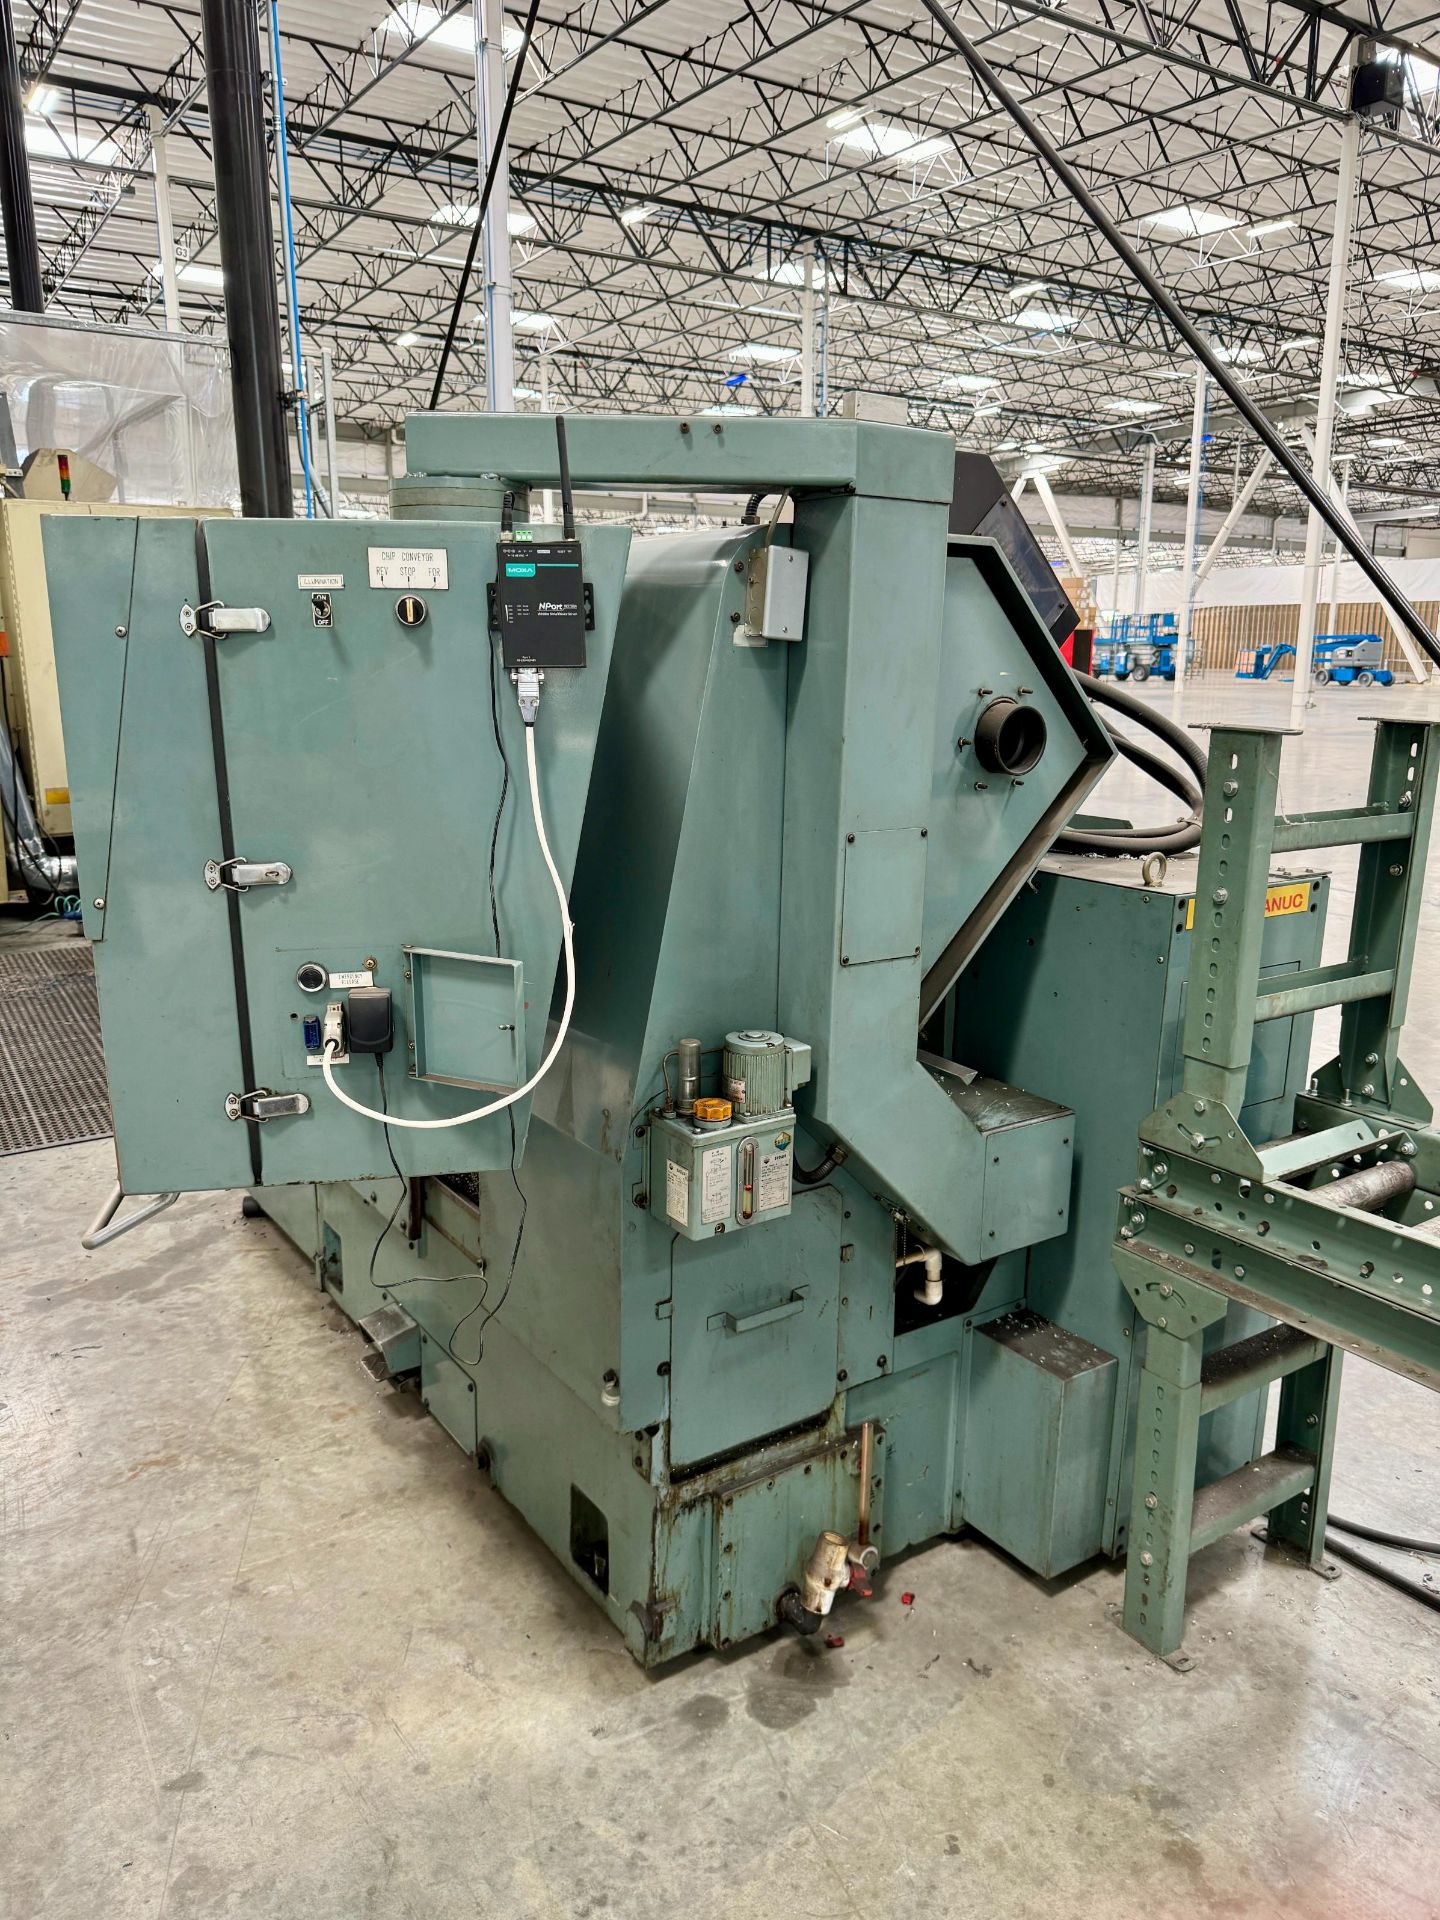 MORI SEIKI SL-1A TURNING CENTER, FANUC SYSTEM 10TE-F CONTROL, TAILSTOCK, CHIP CONVEYOR, S/N 736 - Image 9 of 17